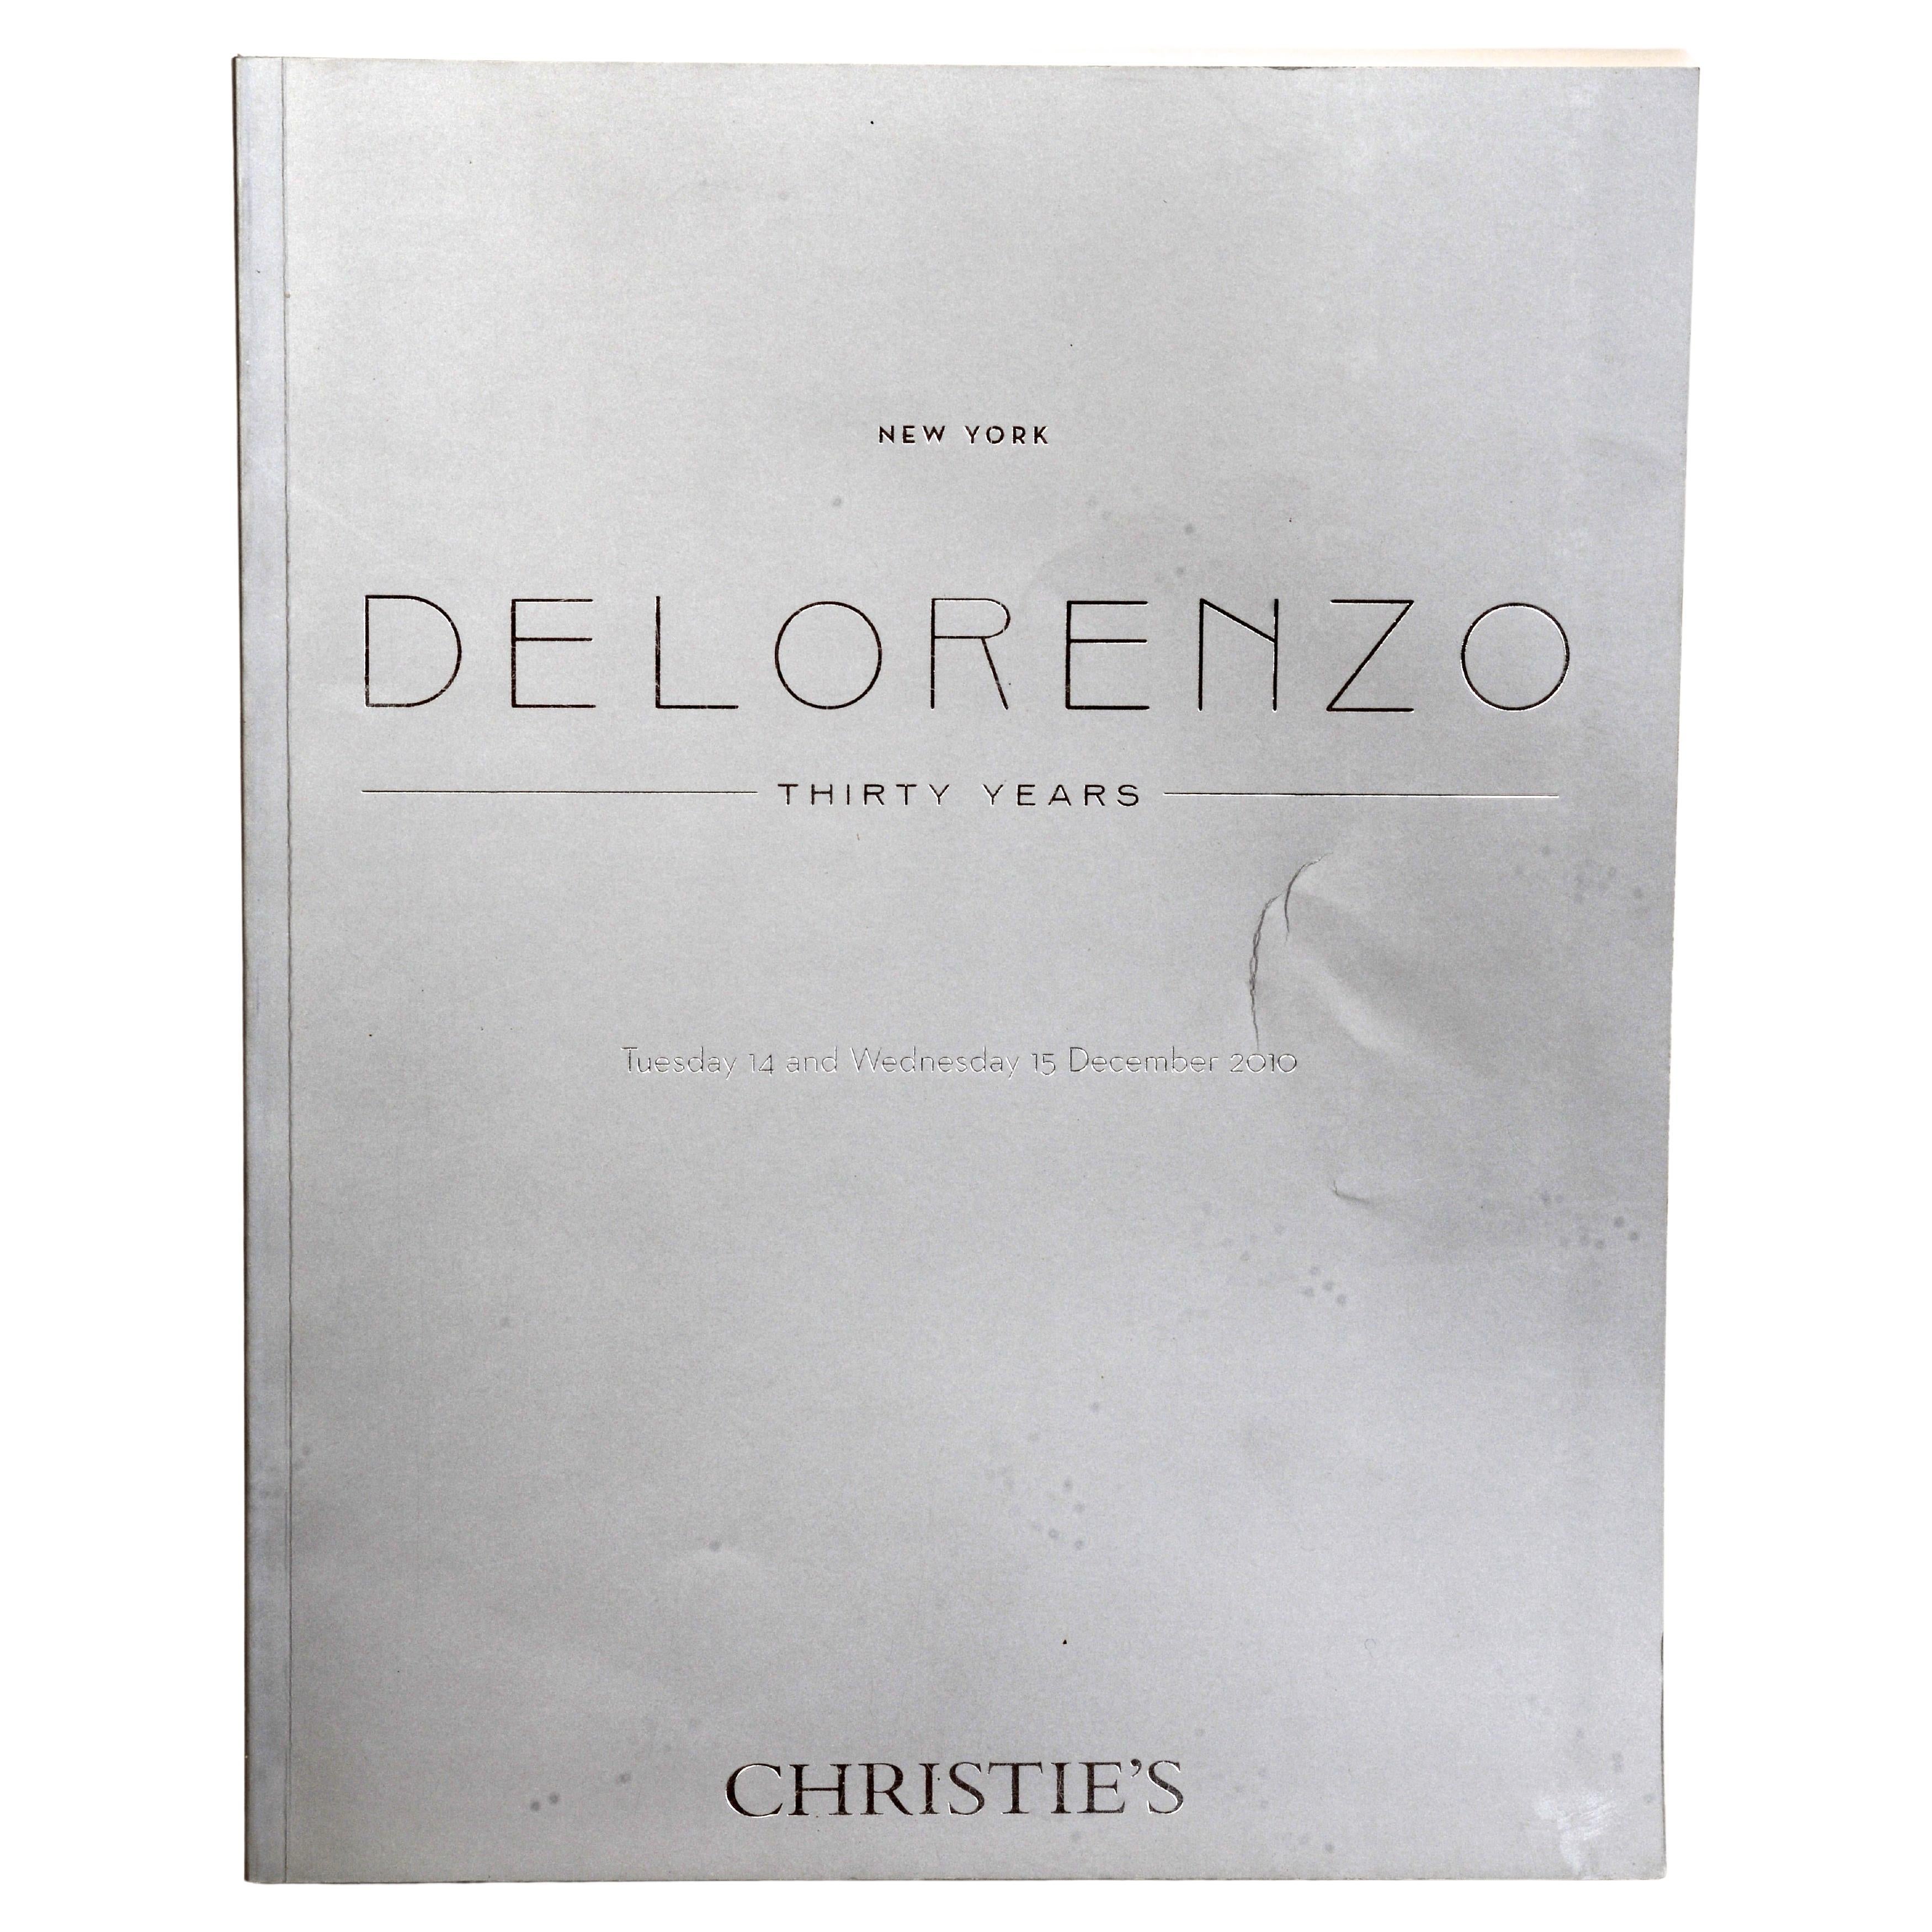 Delorenzo Thirty Years, 14th and 15th December 2010 Christies 1st Ed Catalog